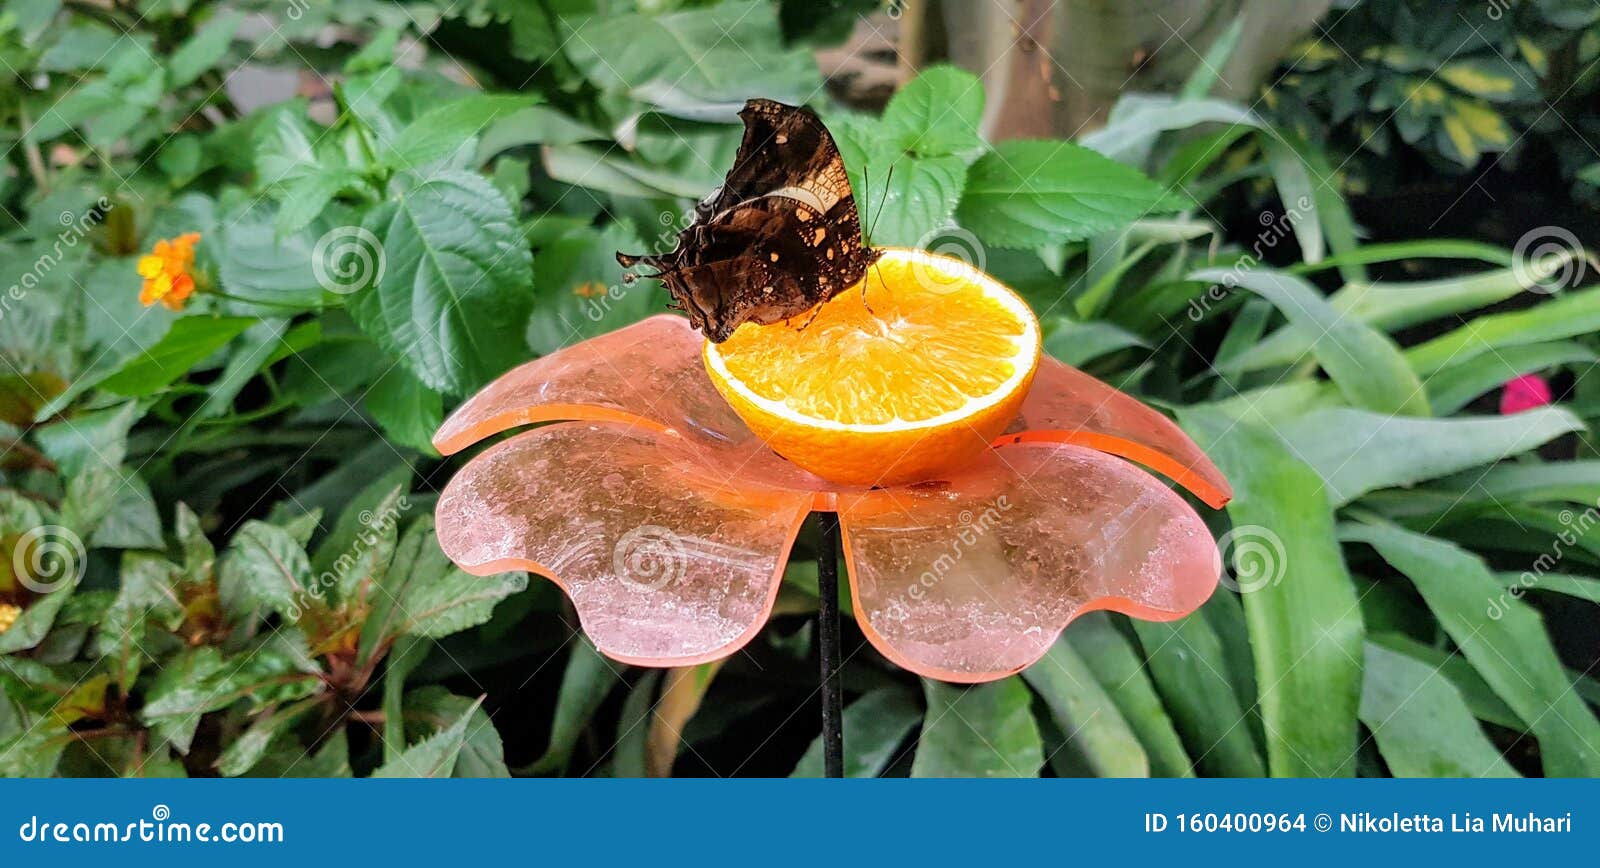 butterfly in a greenhouse - jazzy leafwing butterfly